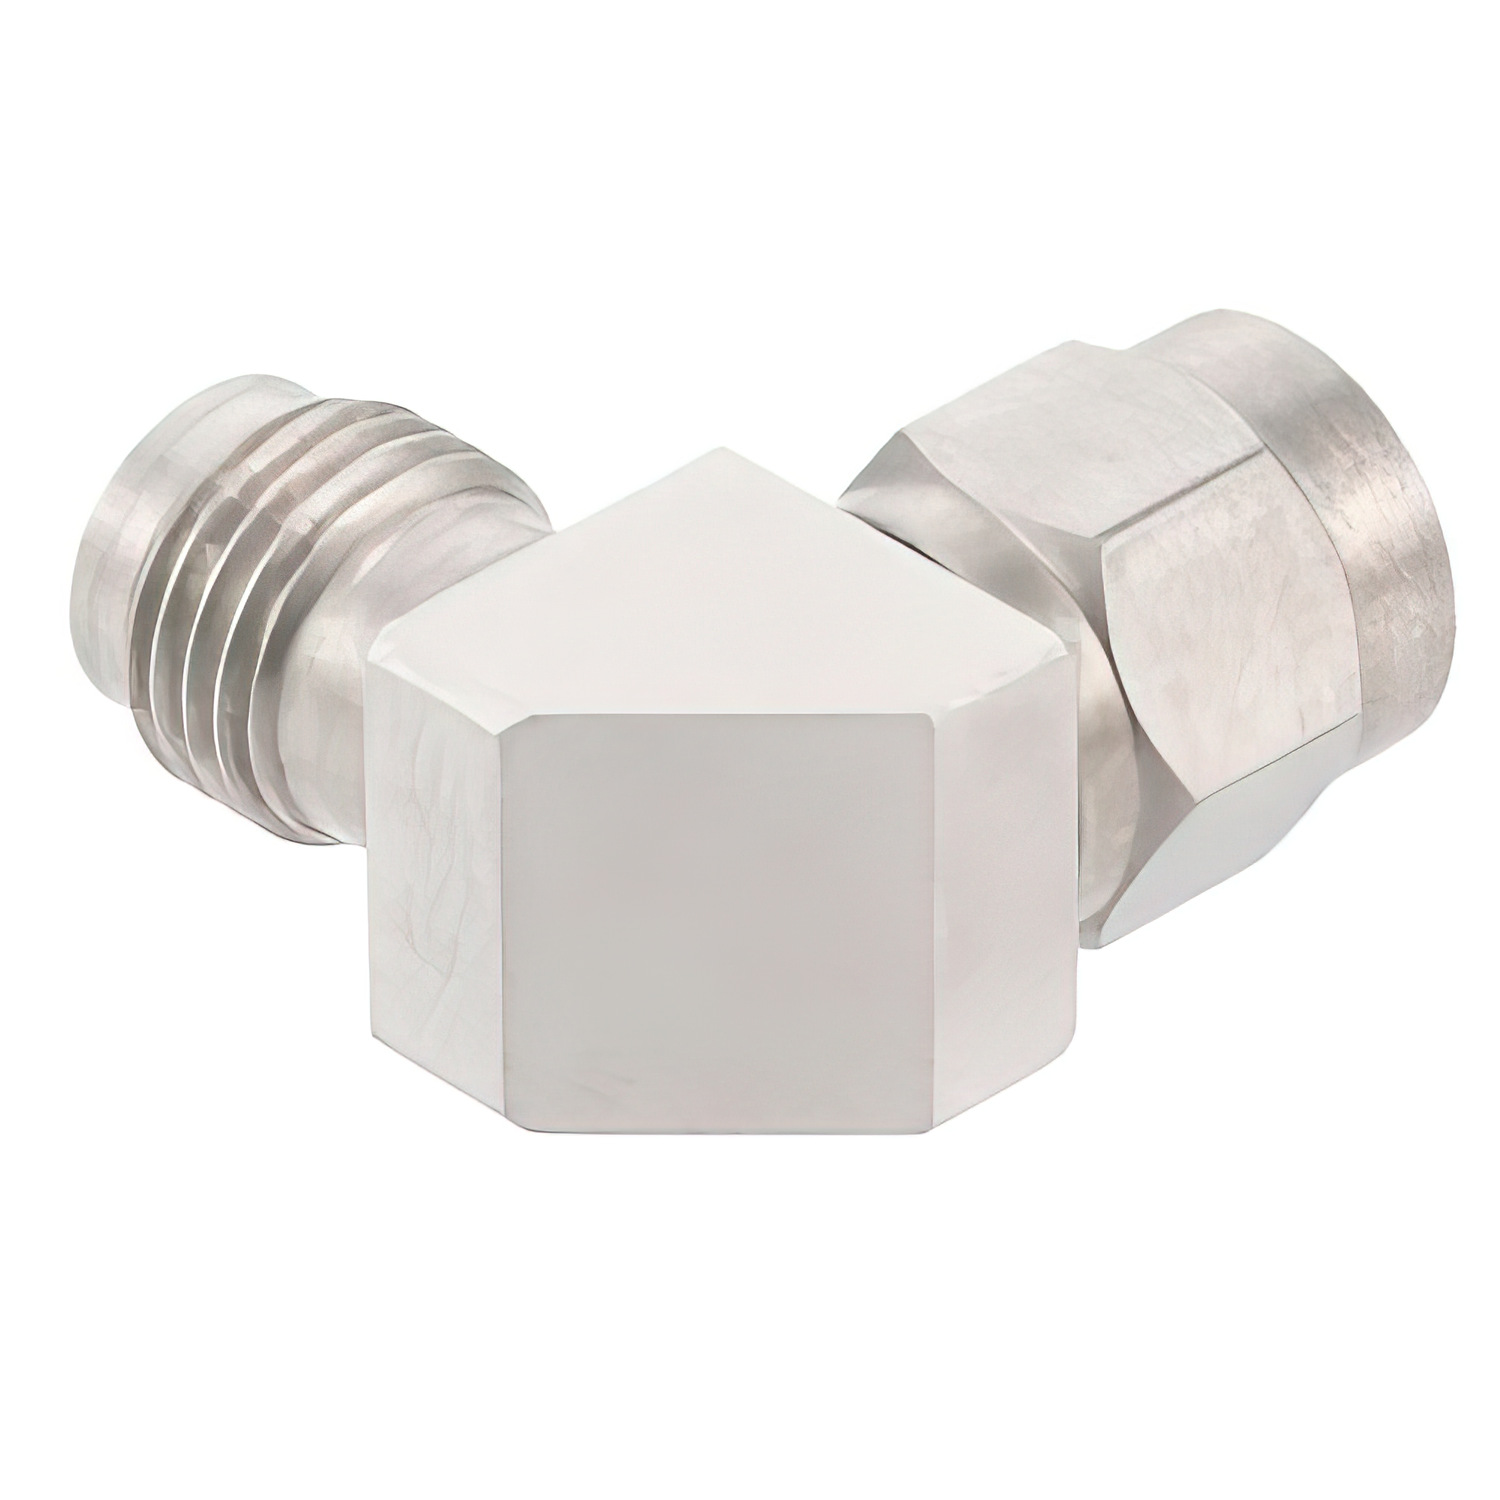 1.85mm Male to 2.4mm Female Miter Right Angle Adapter1